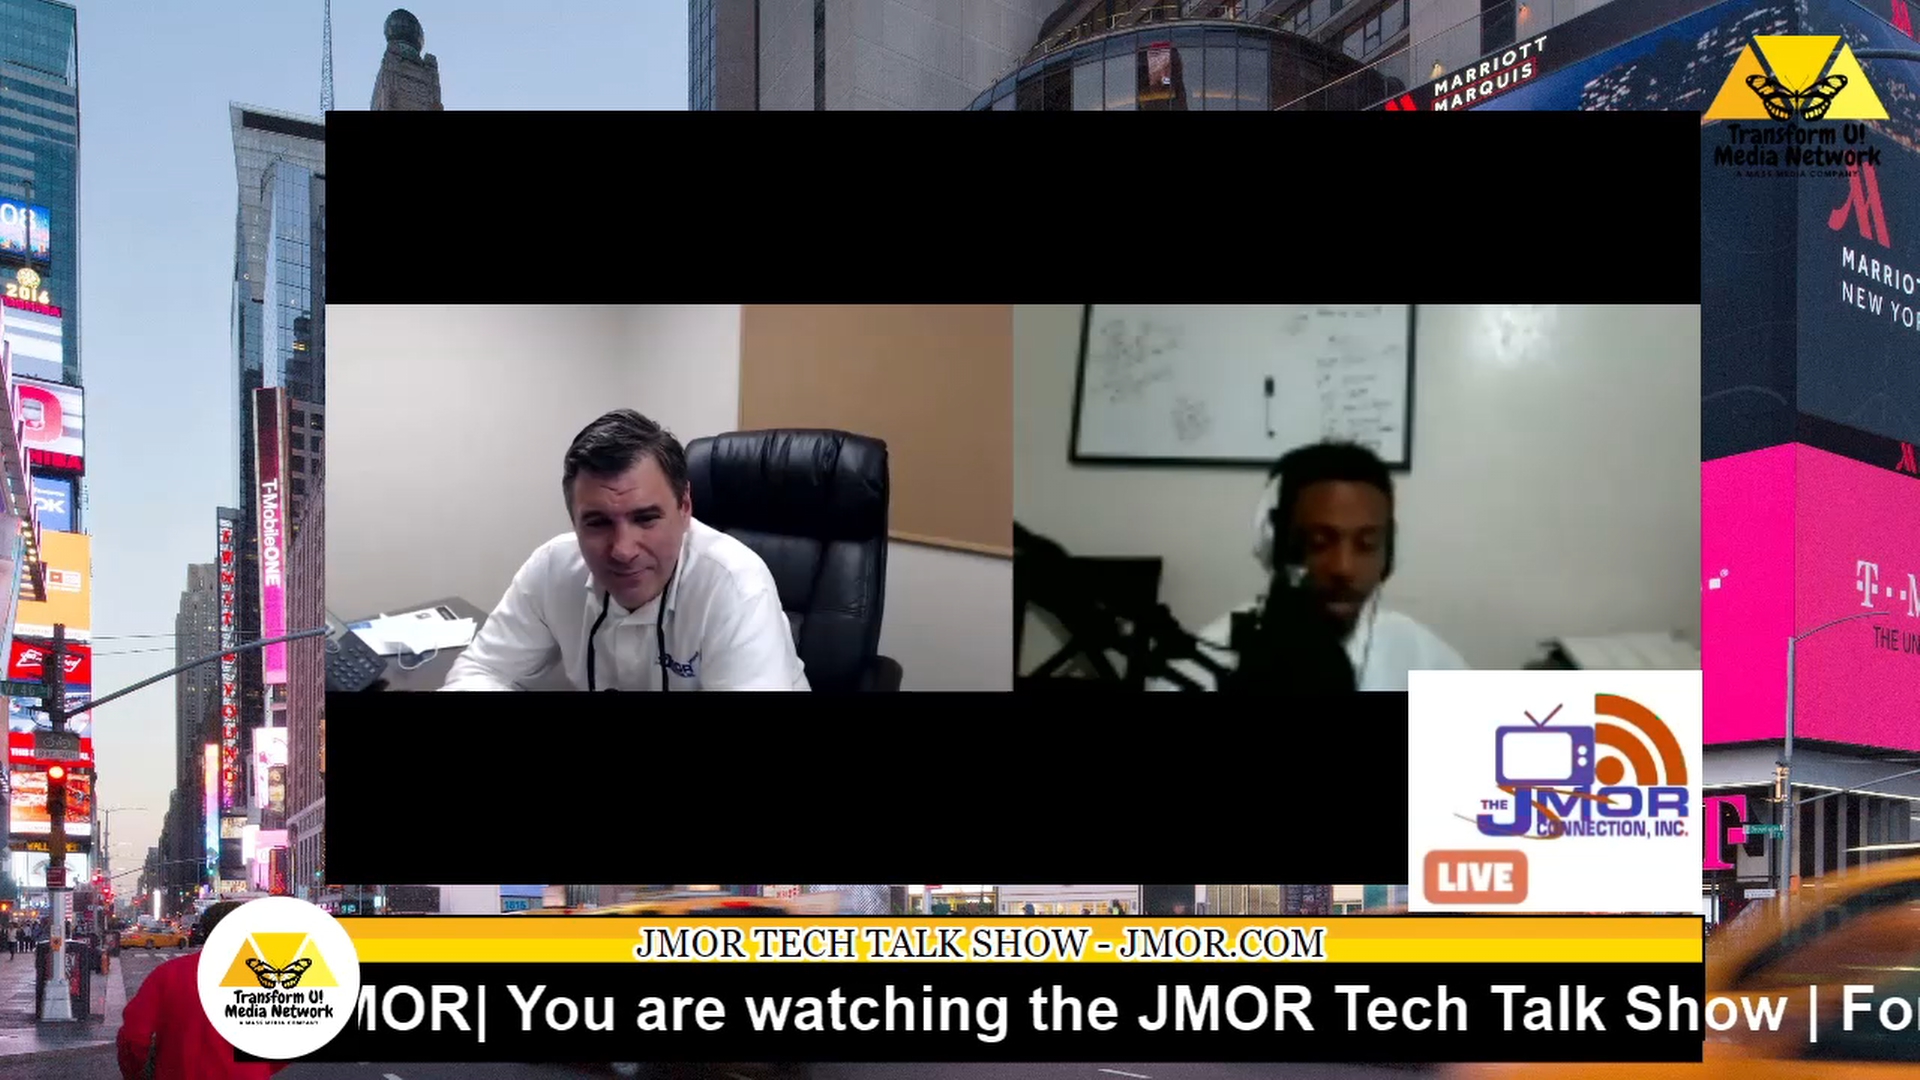 JMOR Tech Talk Show 2020 E12:  FB going to pay people for deactivacting their account during the election, Walmart, Amazon, Uber and more